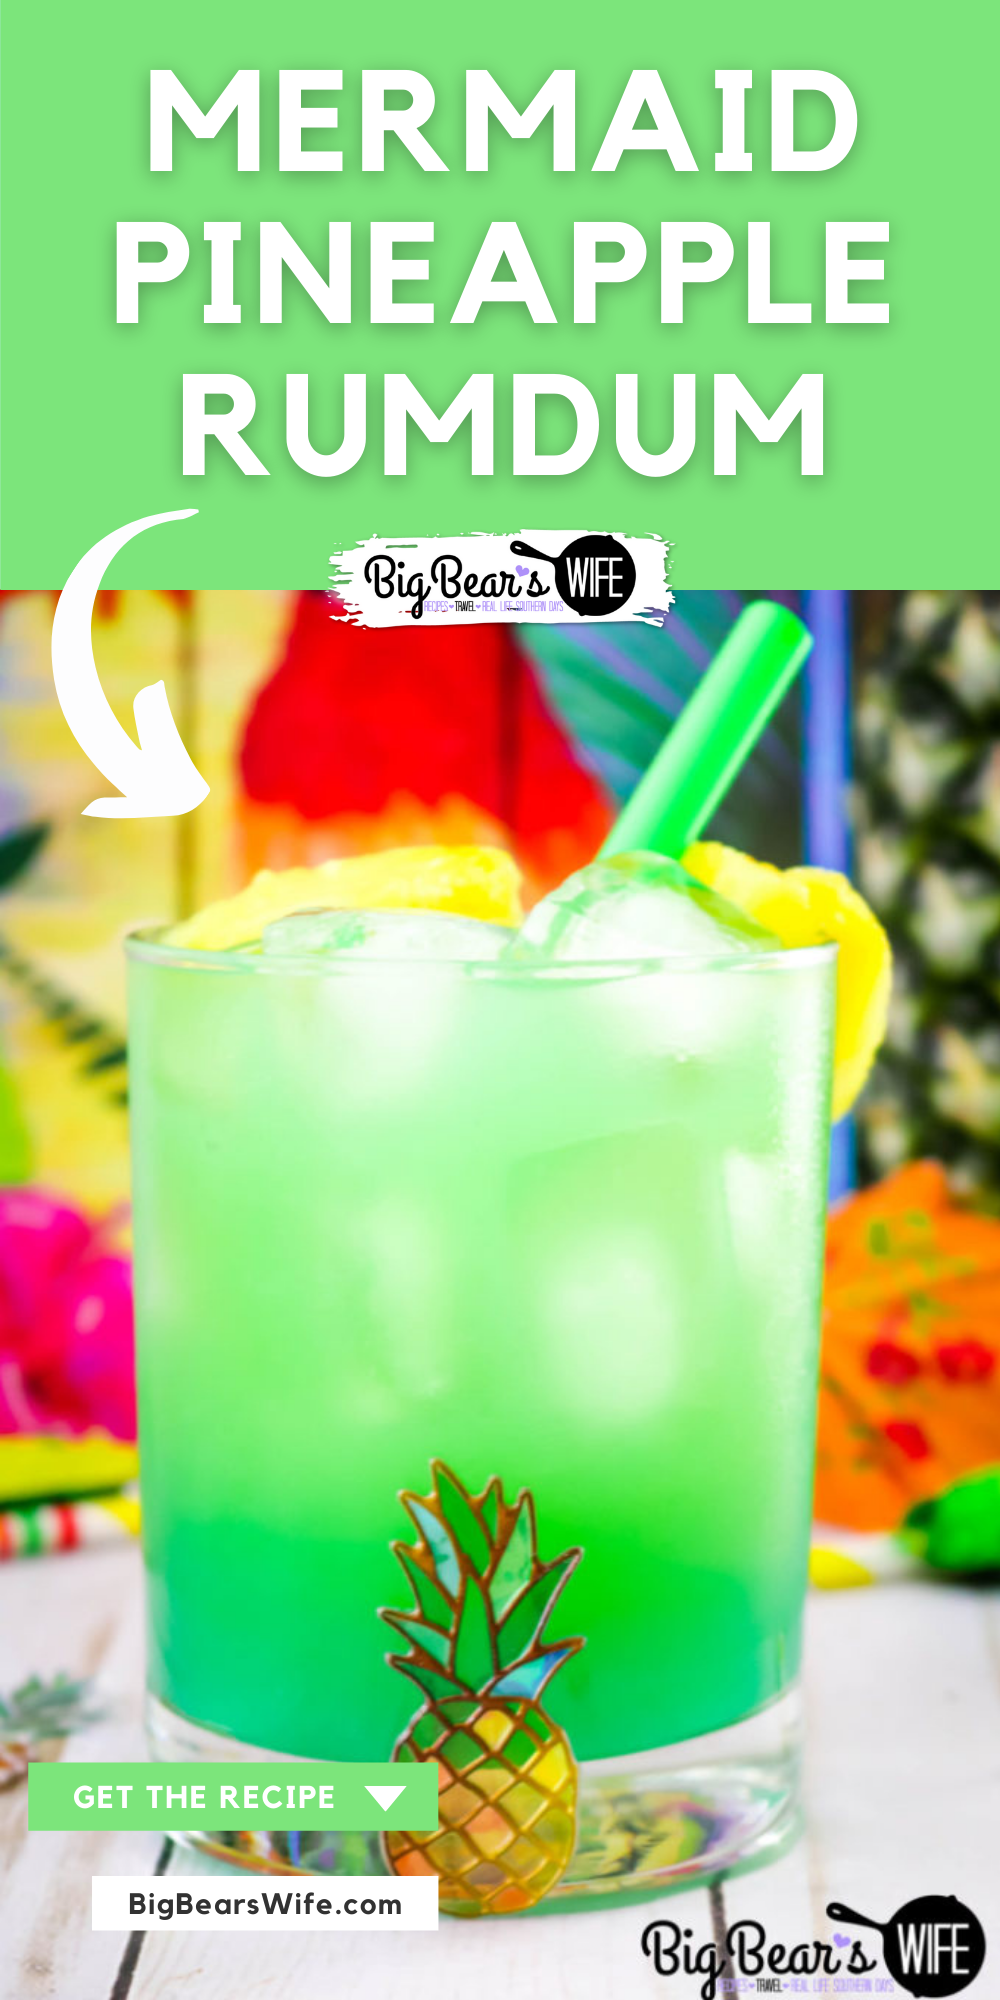 This Mermaid Pineapple RumDum will make you feel like you’re hanging out on the beach and after a few you might feel like you’re swimming with mermaids! It’s got pineapple rum and vanilla rum mixed plus it’s topped with extra pineapple! For an extra kick, soak the pineapple pieces in rum for a few days beforehand! 

 via @bigbearswife